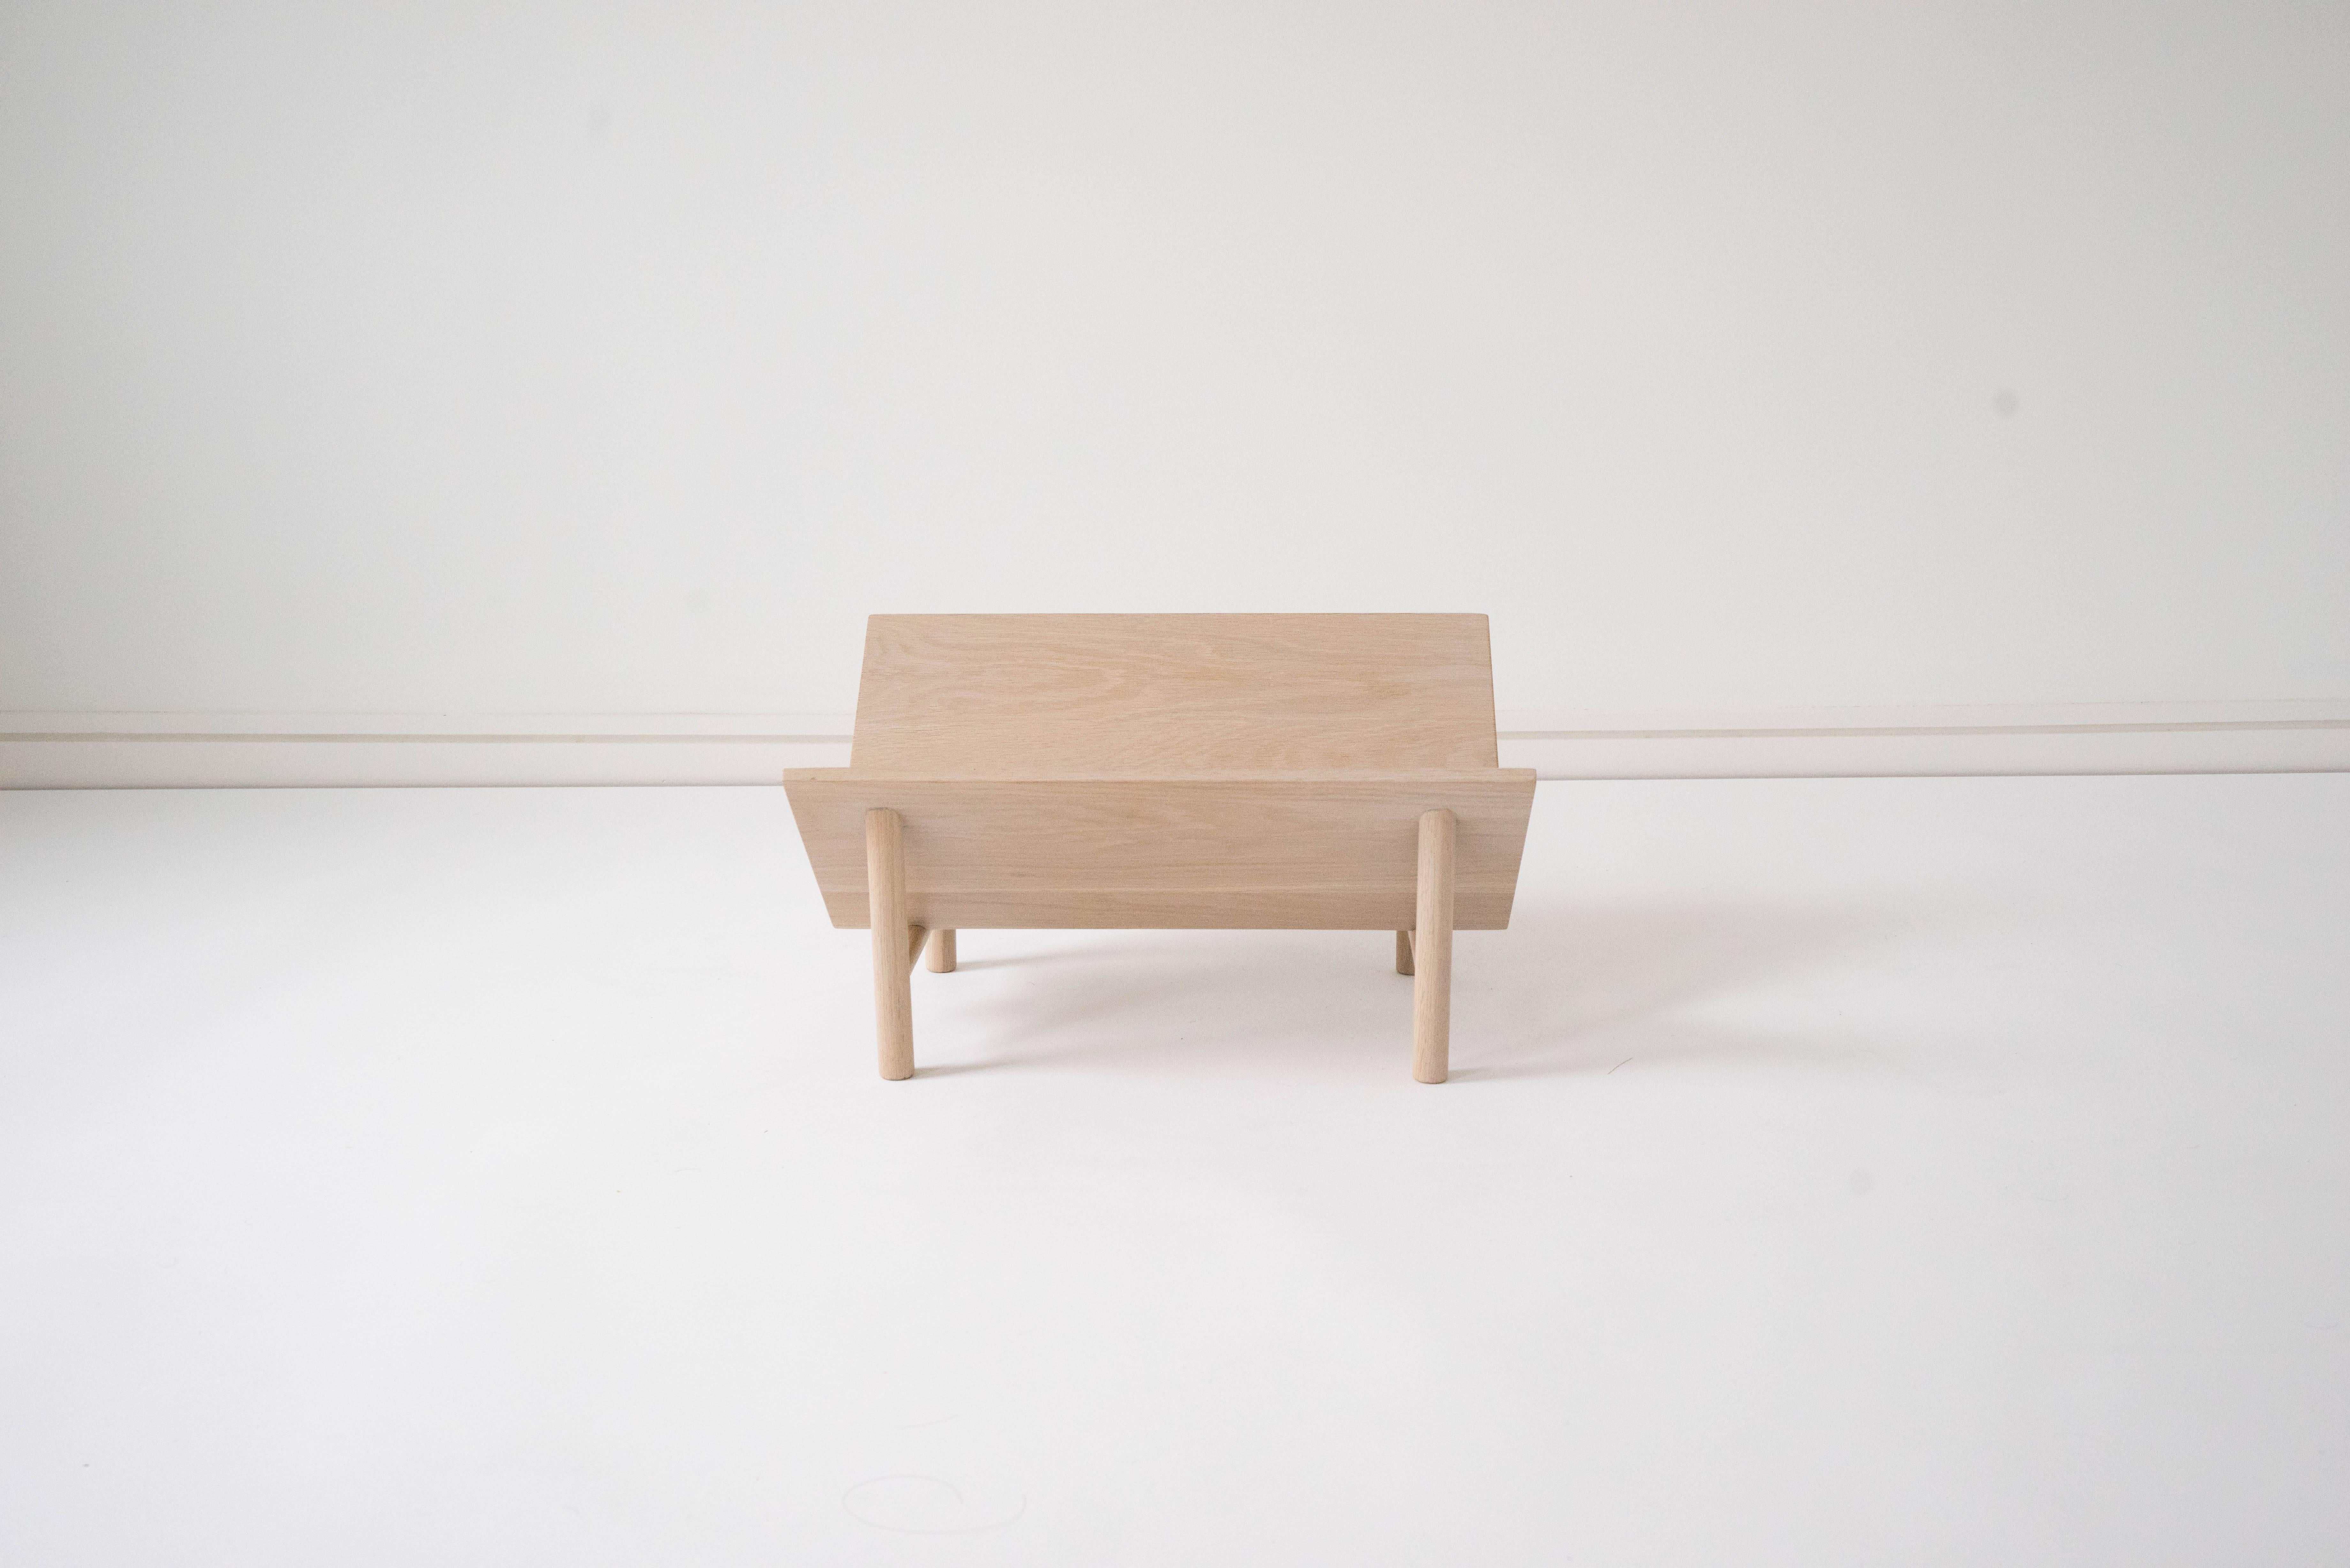 Sun at Six is a contemporary furniture design studio that works with traditional Chinese joinery masters to handcraft our pieces using traditional joinery. Handcrafted using traditional joinery. A floating stand for books, records, and display. Wide